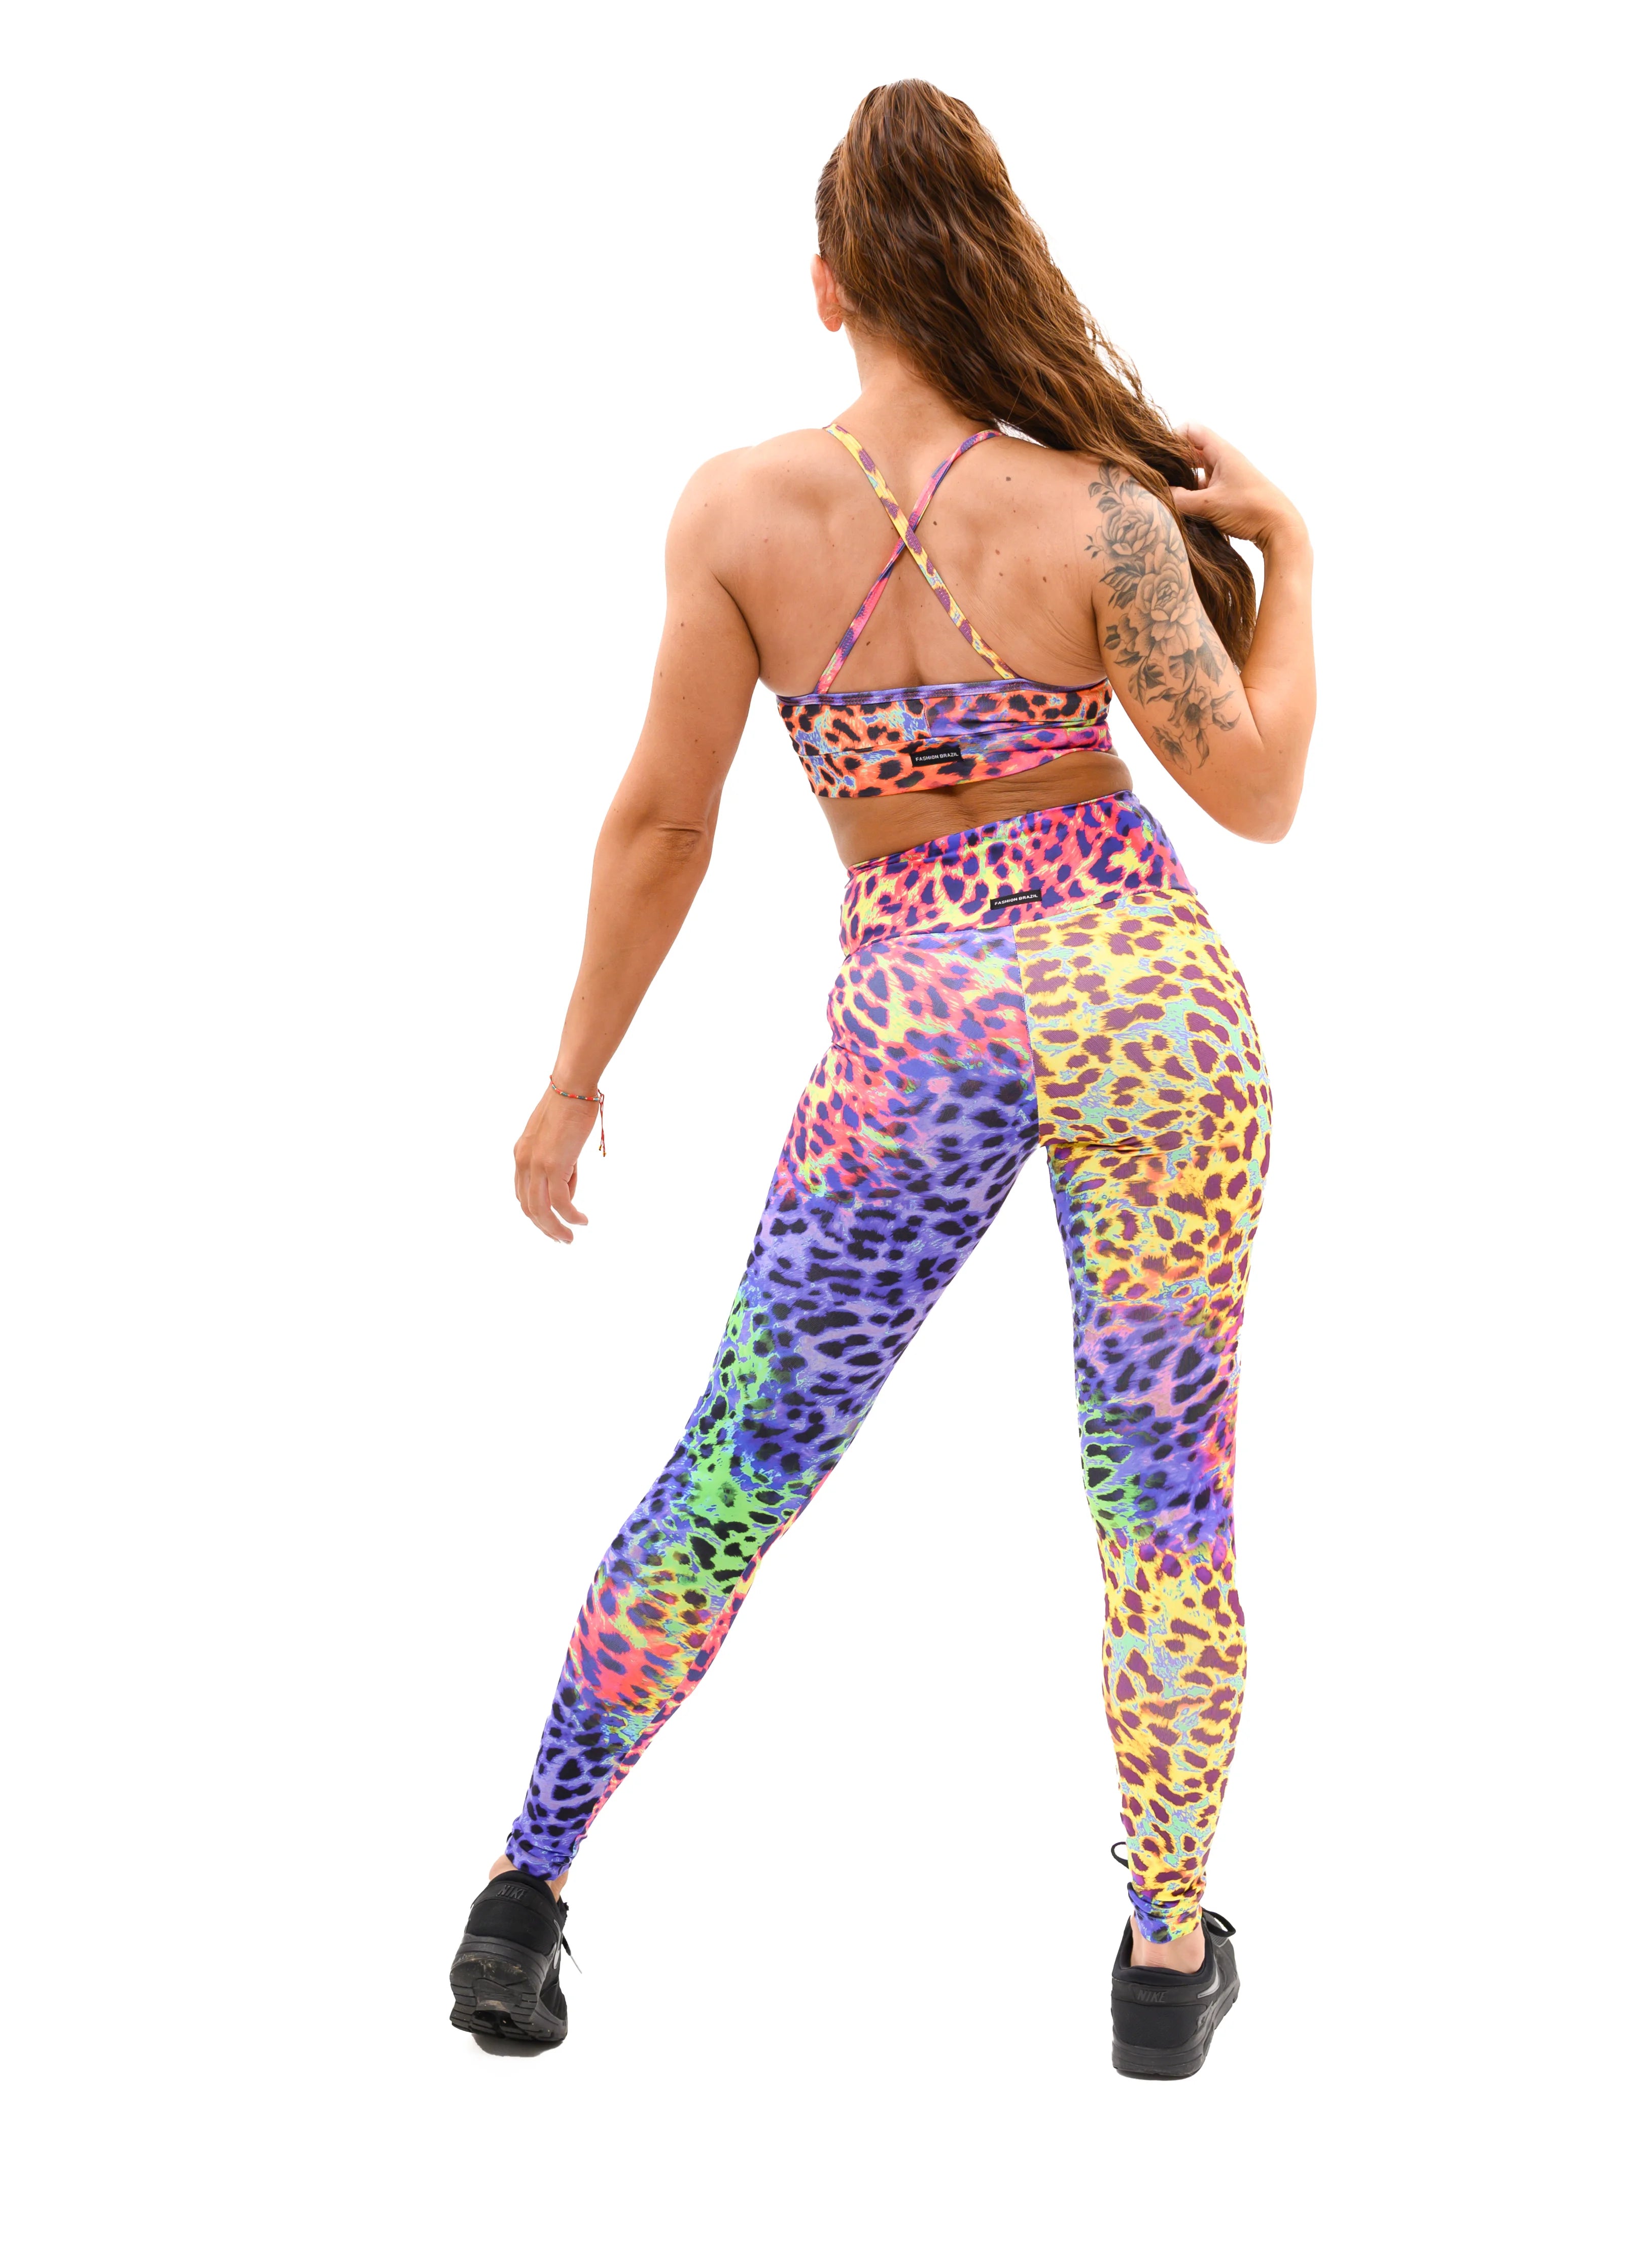 Neon Leopard Tights and Sports Bra